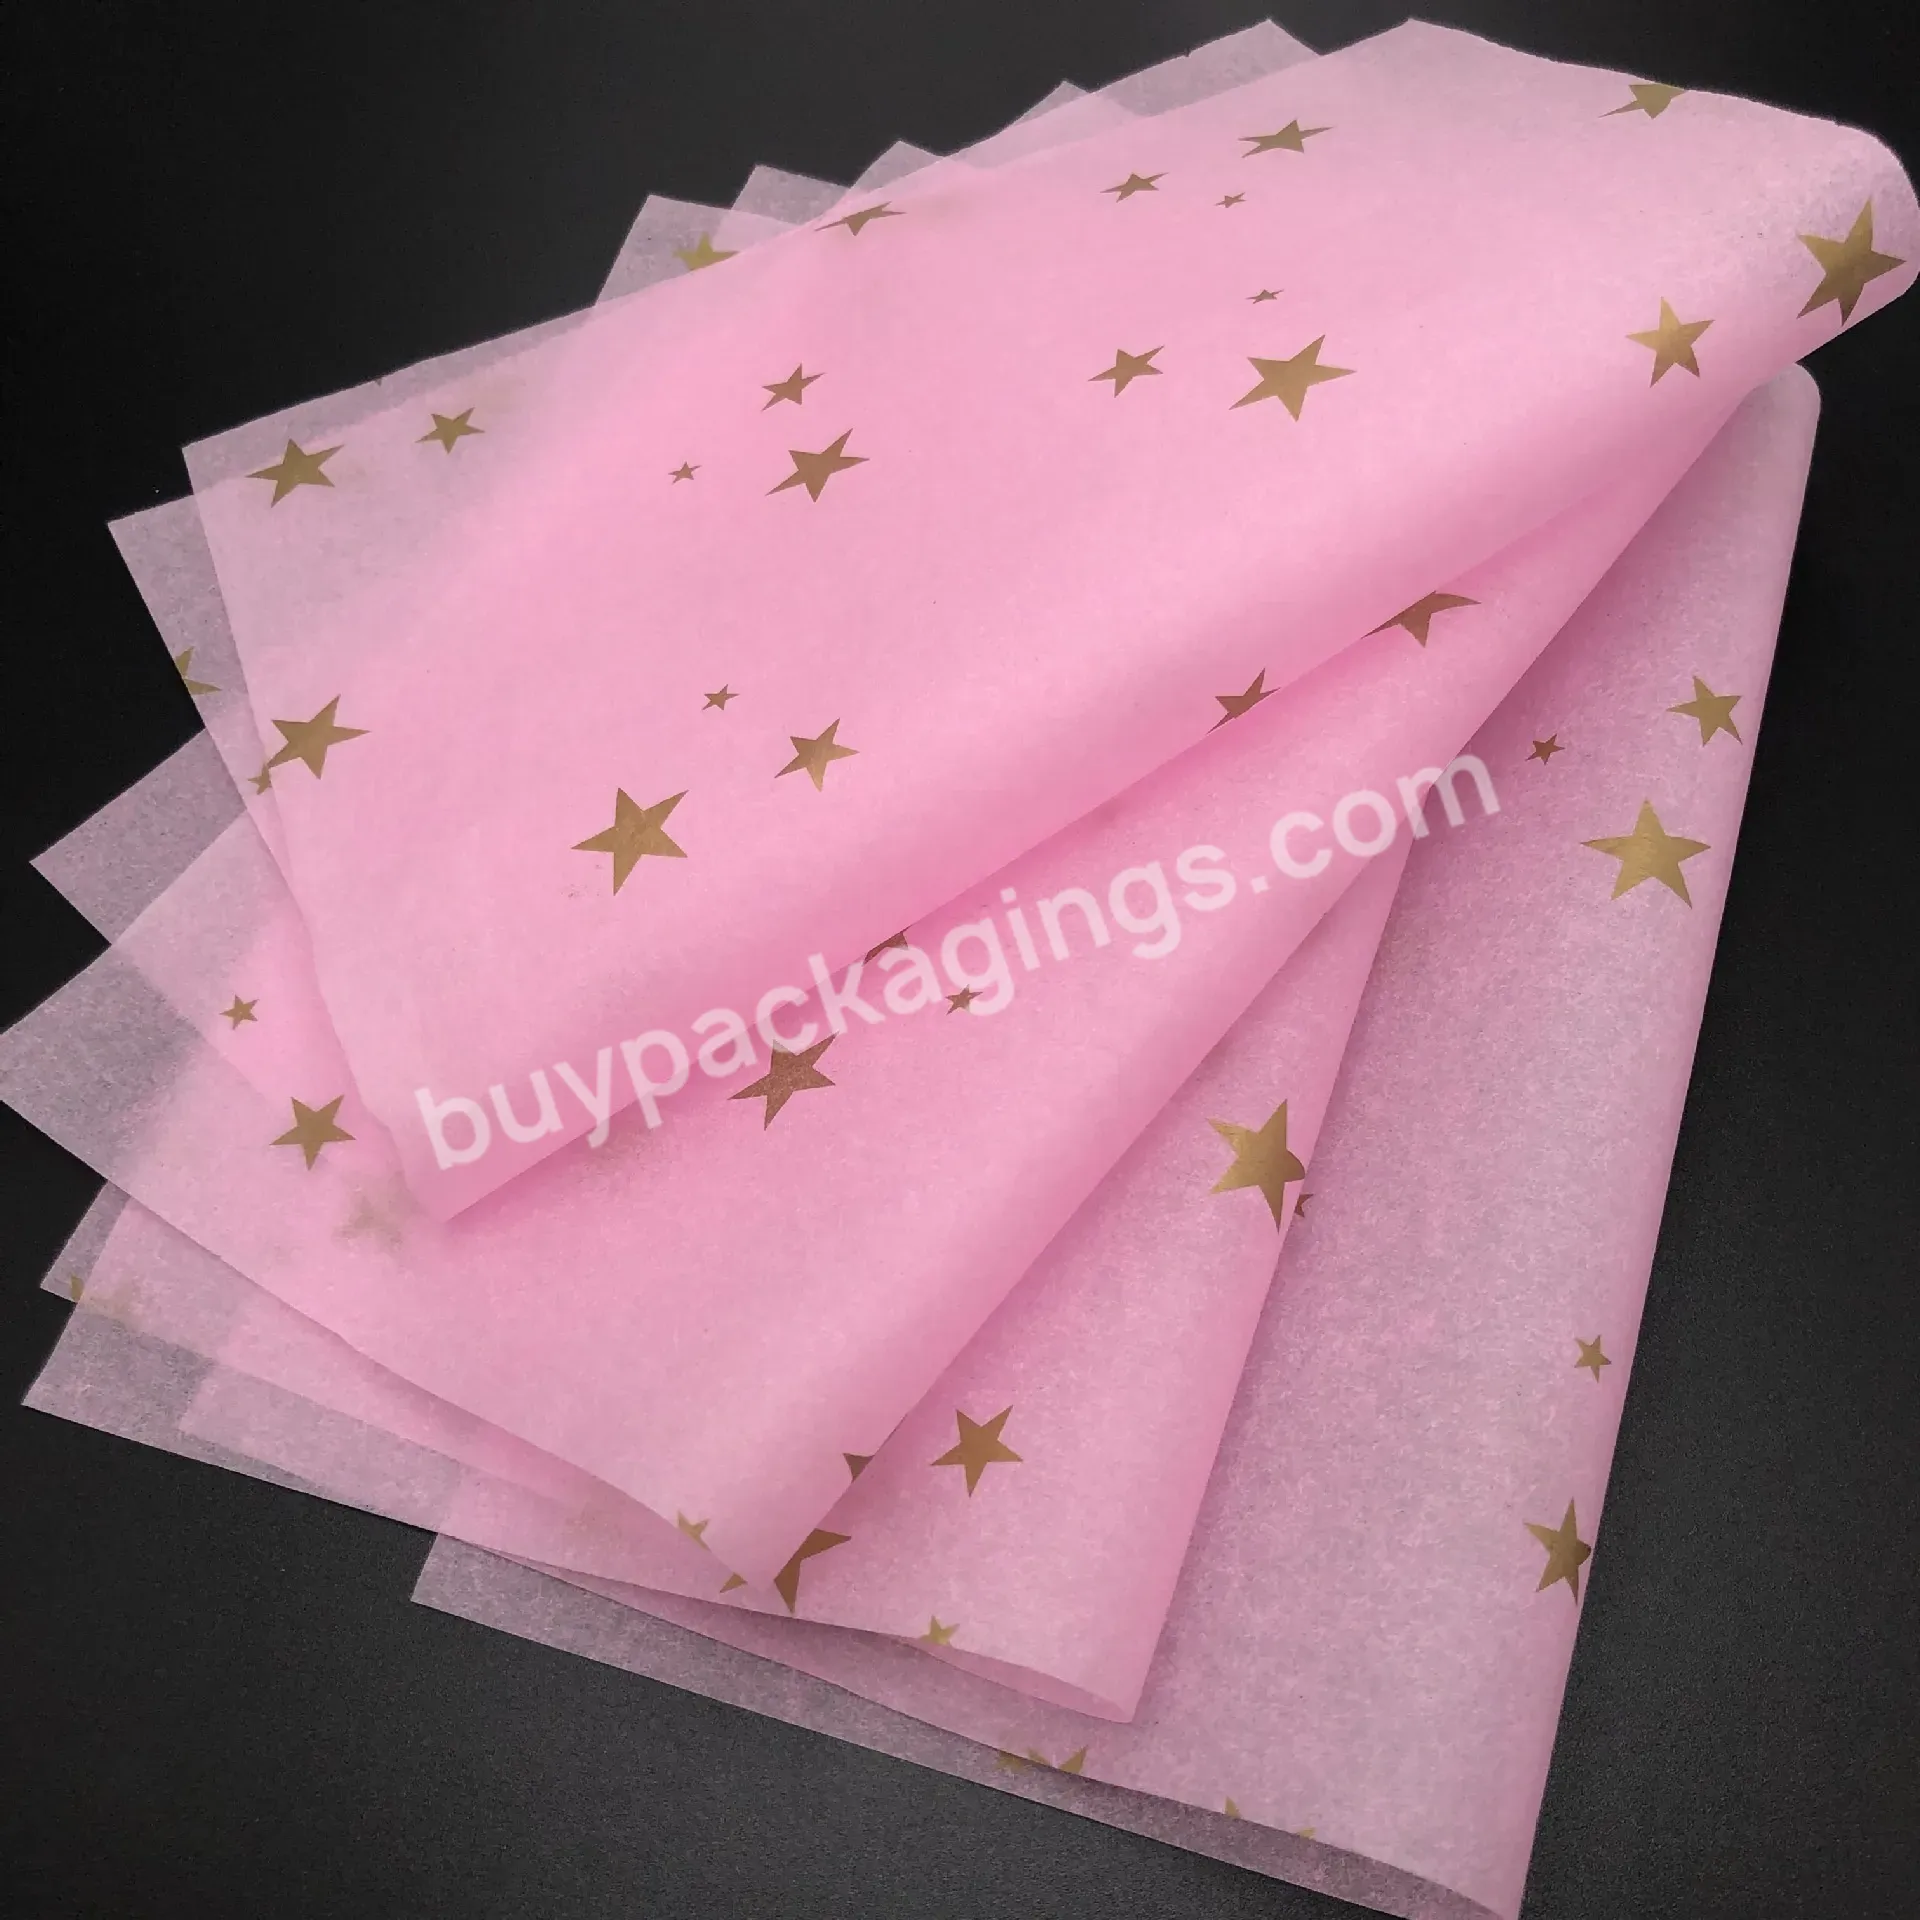 Renewable Cheap Gift Wrapping Paper - Buy Cheap Wrapping Paper,Renewable Wrapping Paper,Exquisite Gift Wrapping Paper.